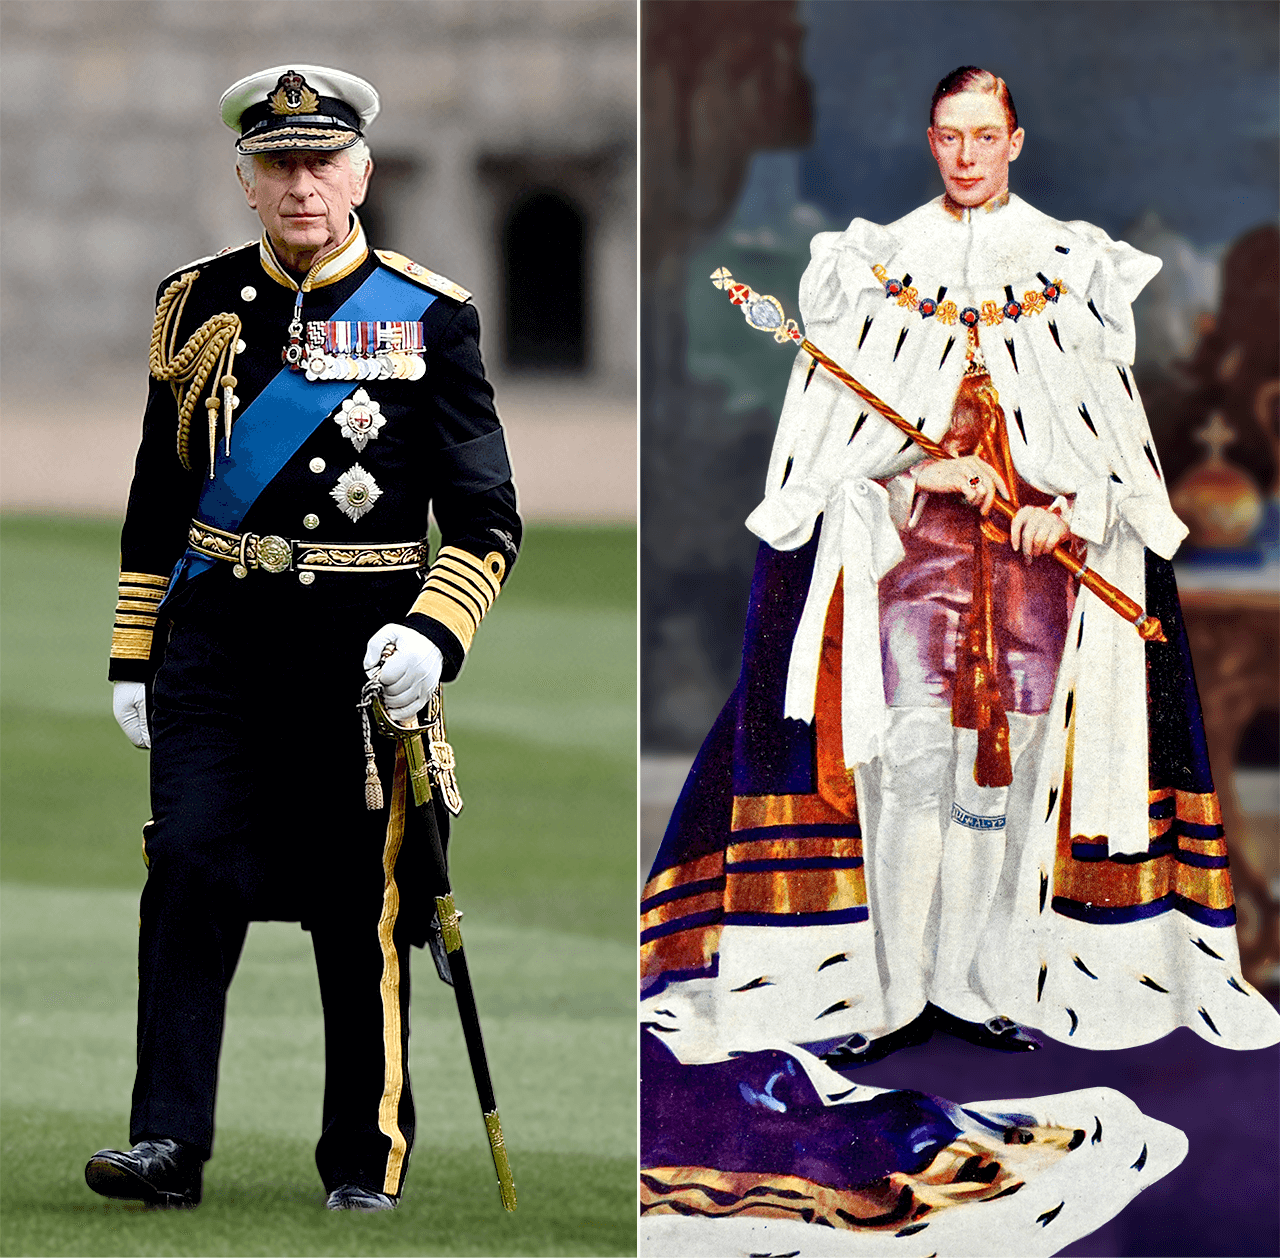 King Charles III in a military uniform and George VI in breeches and stockings